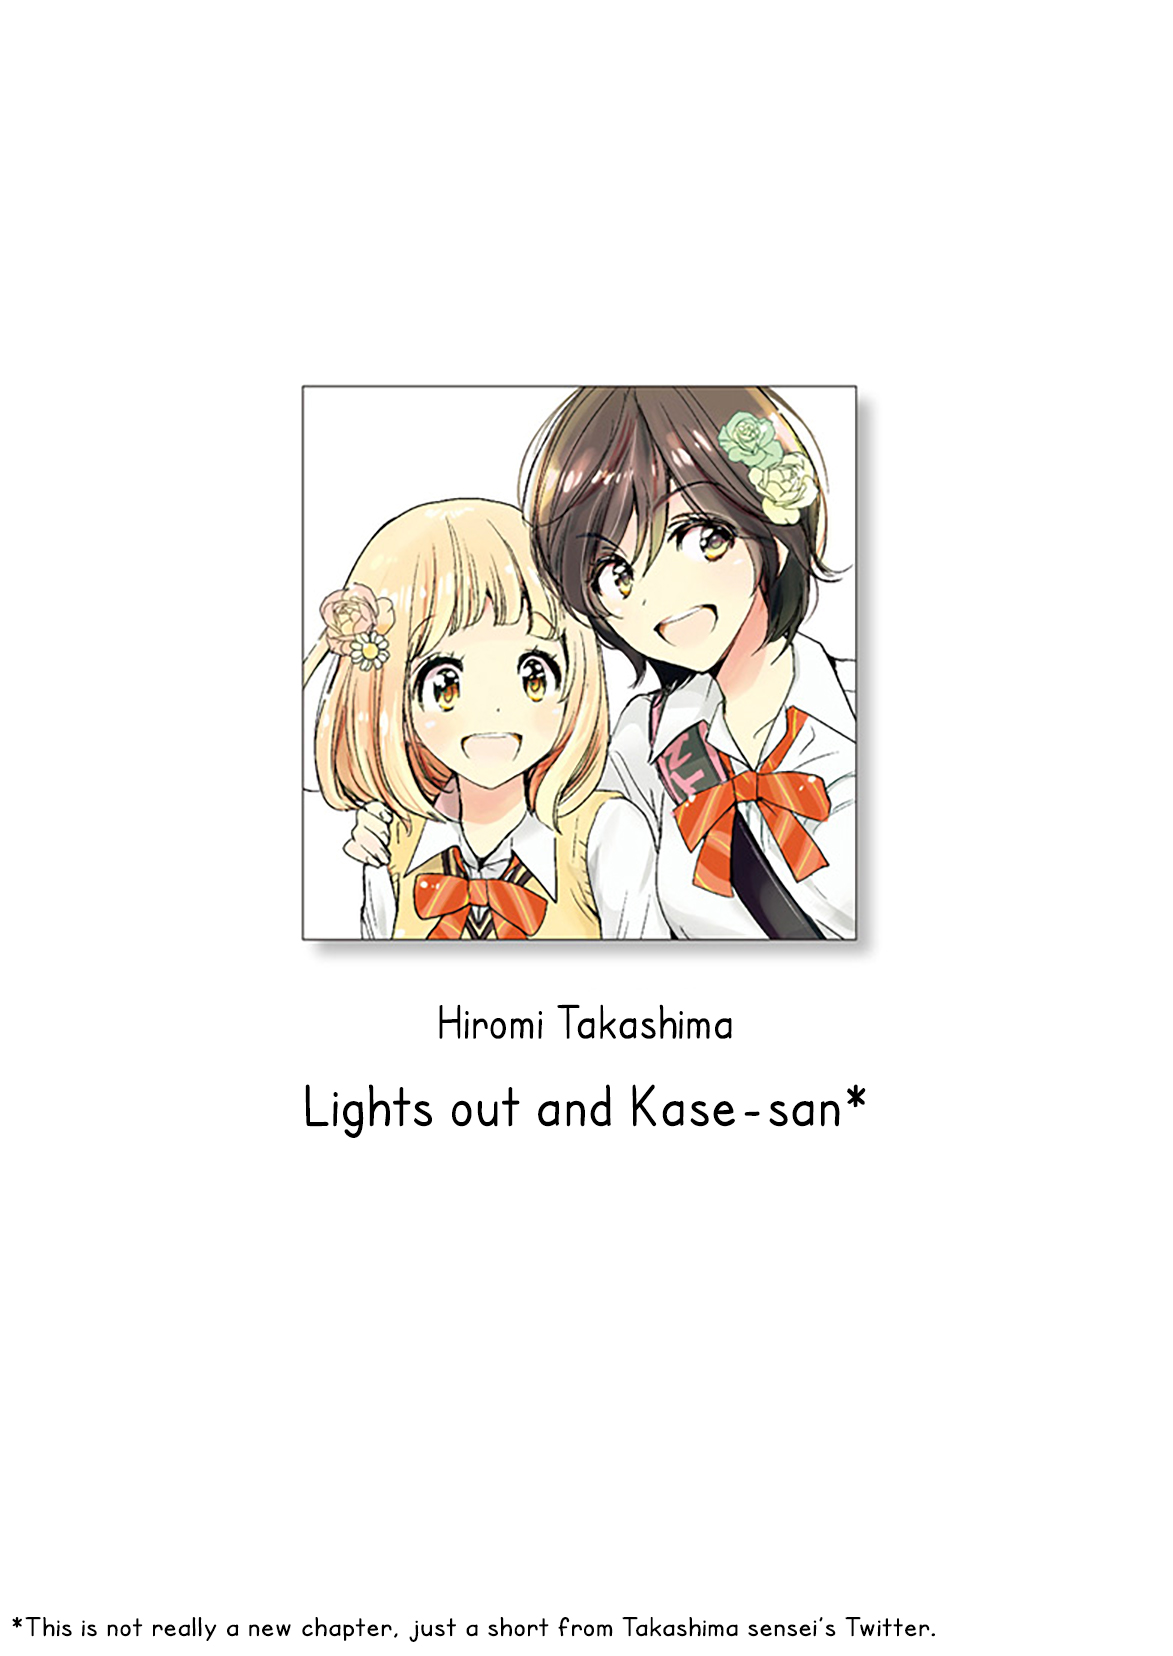 Yamada To Kase-San Chapter 13.5: Extra - Lights Out And Kase-San - Picture 1